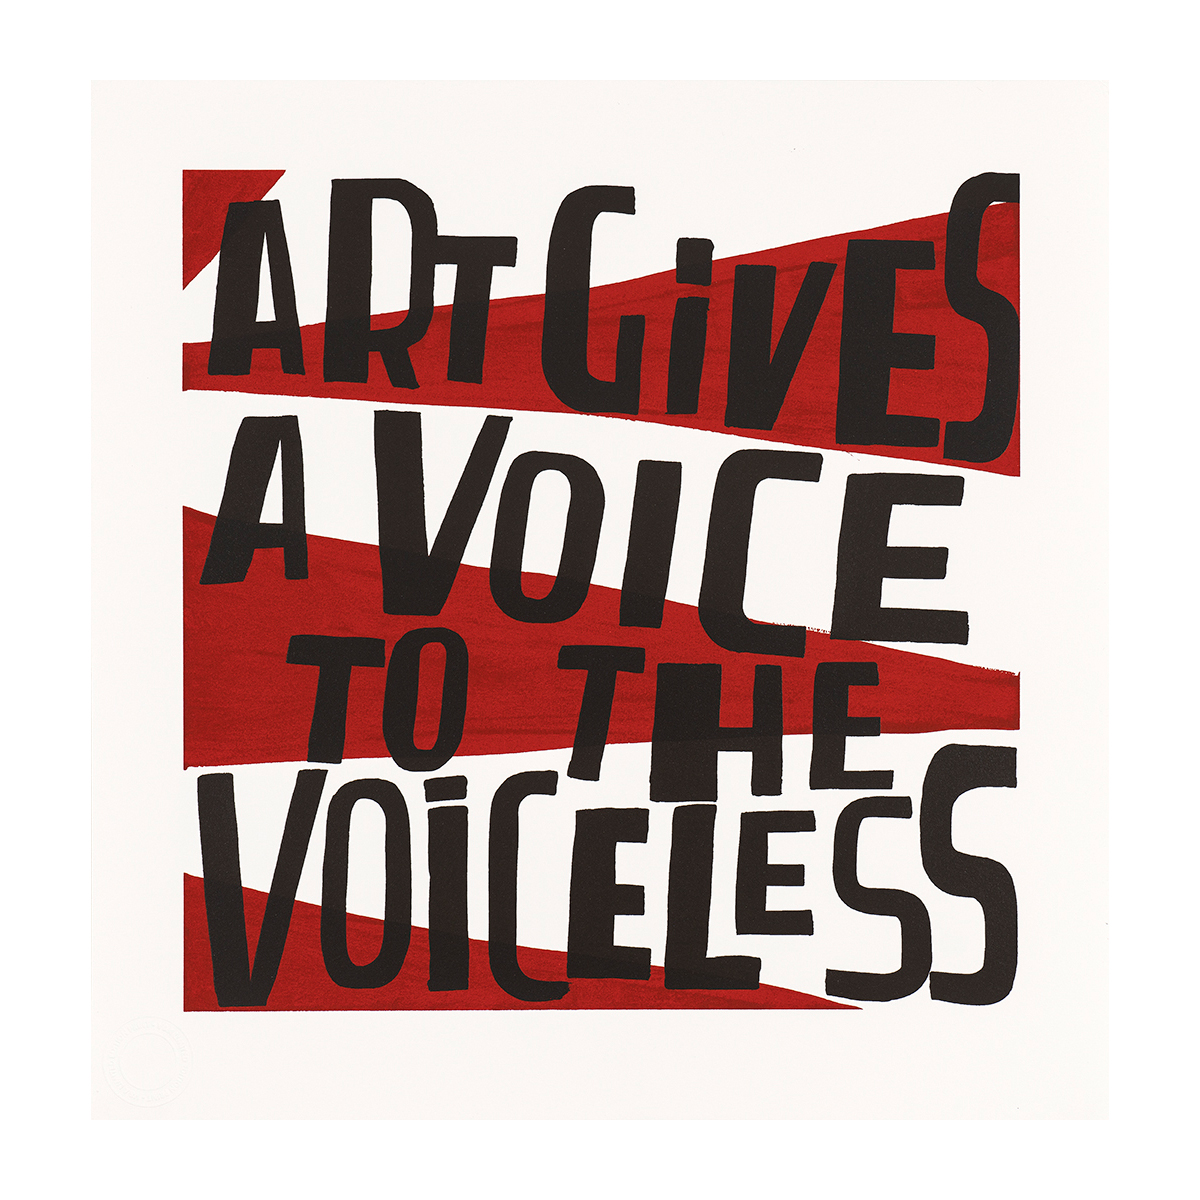 'Art Gives a Voice to the Voiceless' by Bob and Roberta Smith